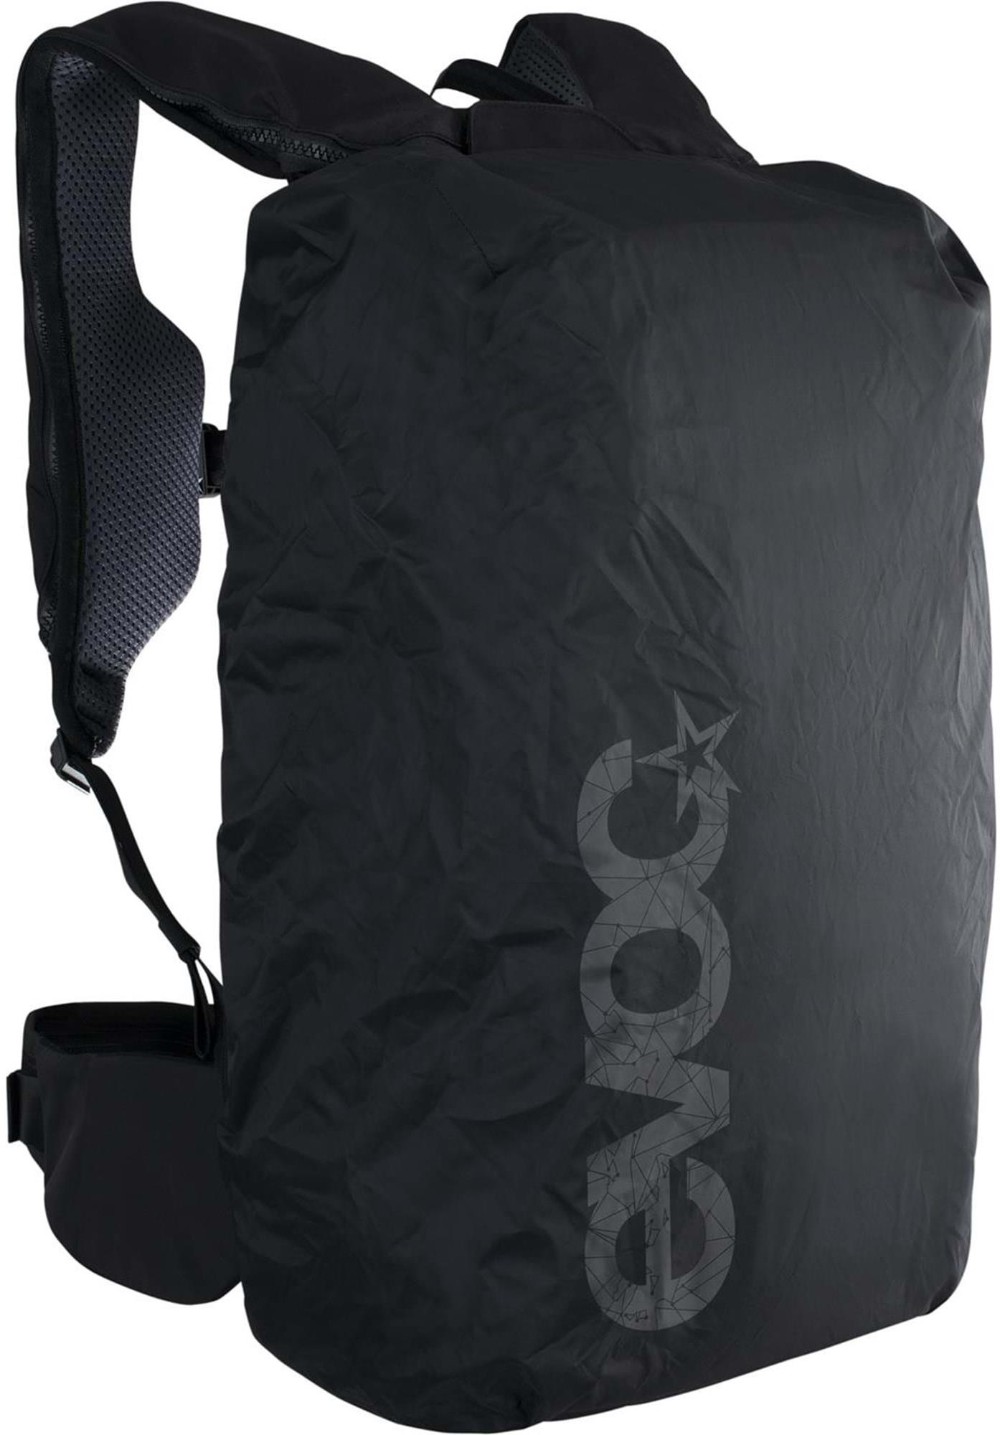 Raincover Sleeve For Commute Backpack image 0